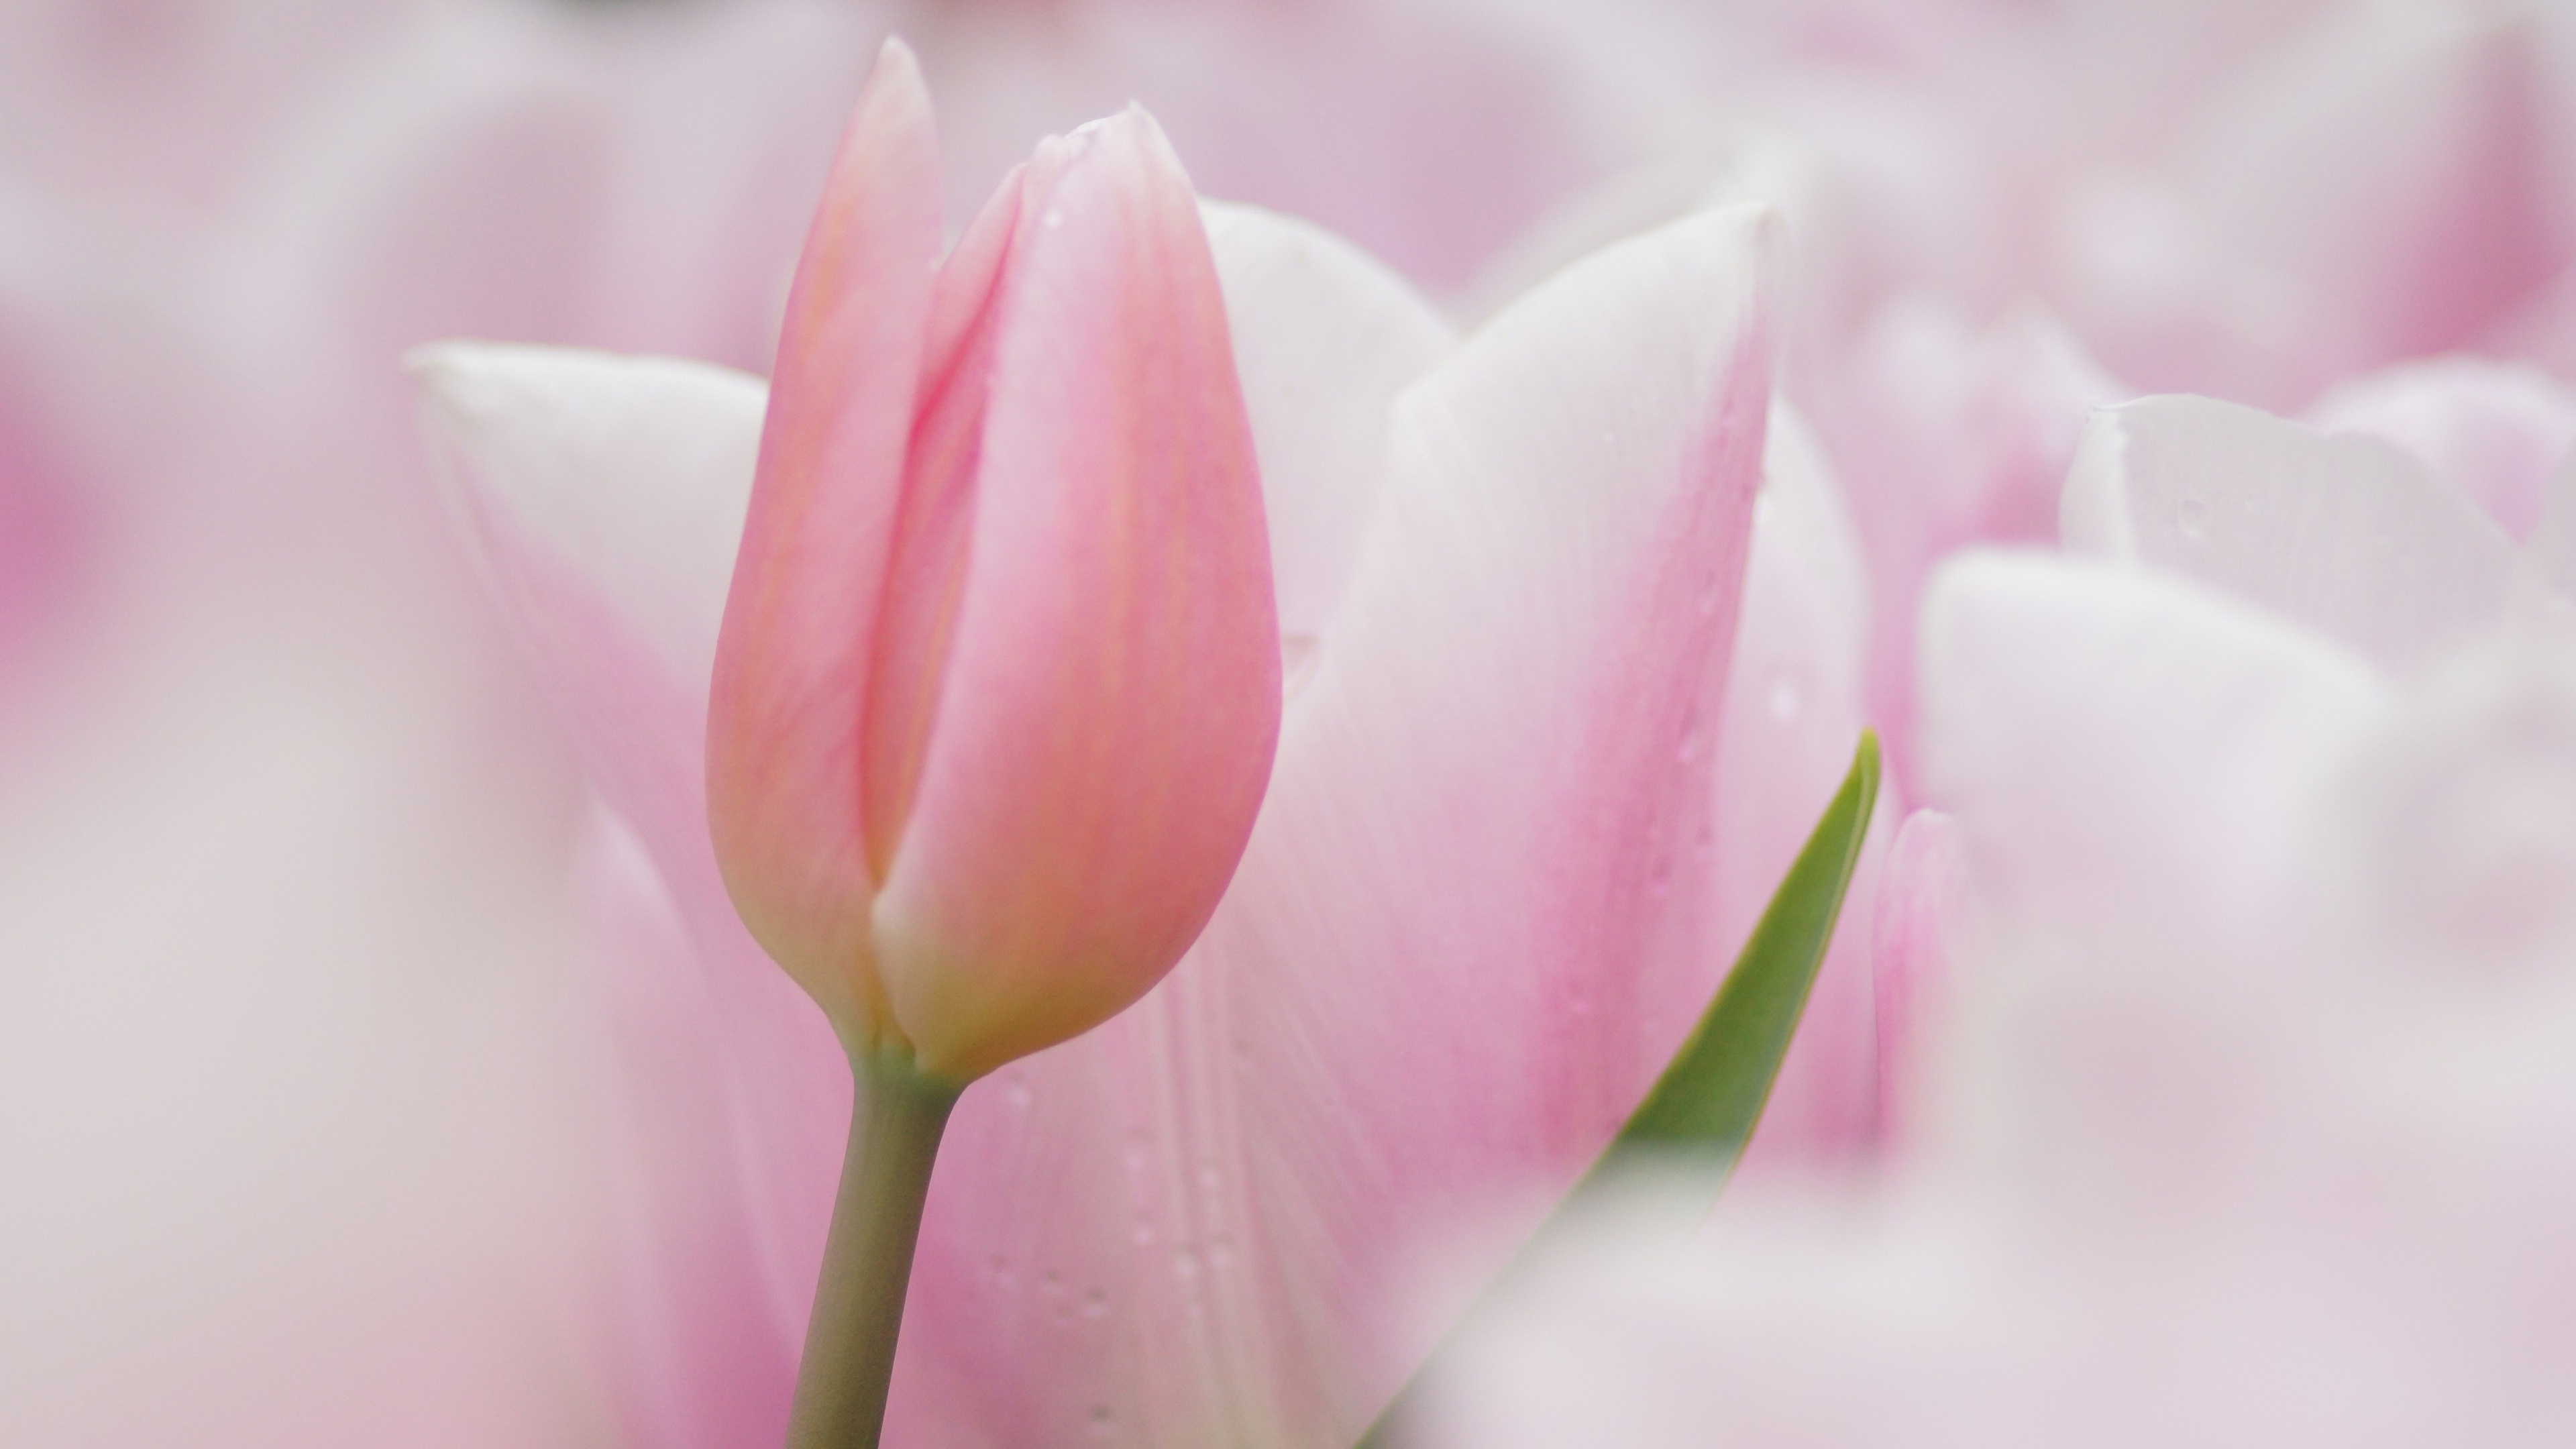 Pink Tulip in Bloom During Daytime. Wallpaper in 3840x2160 Resolution